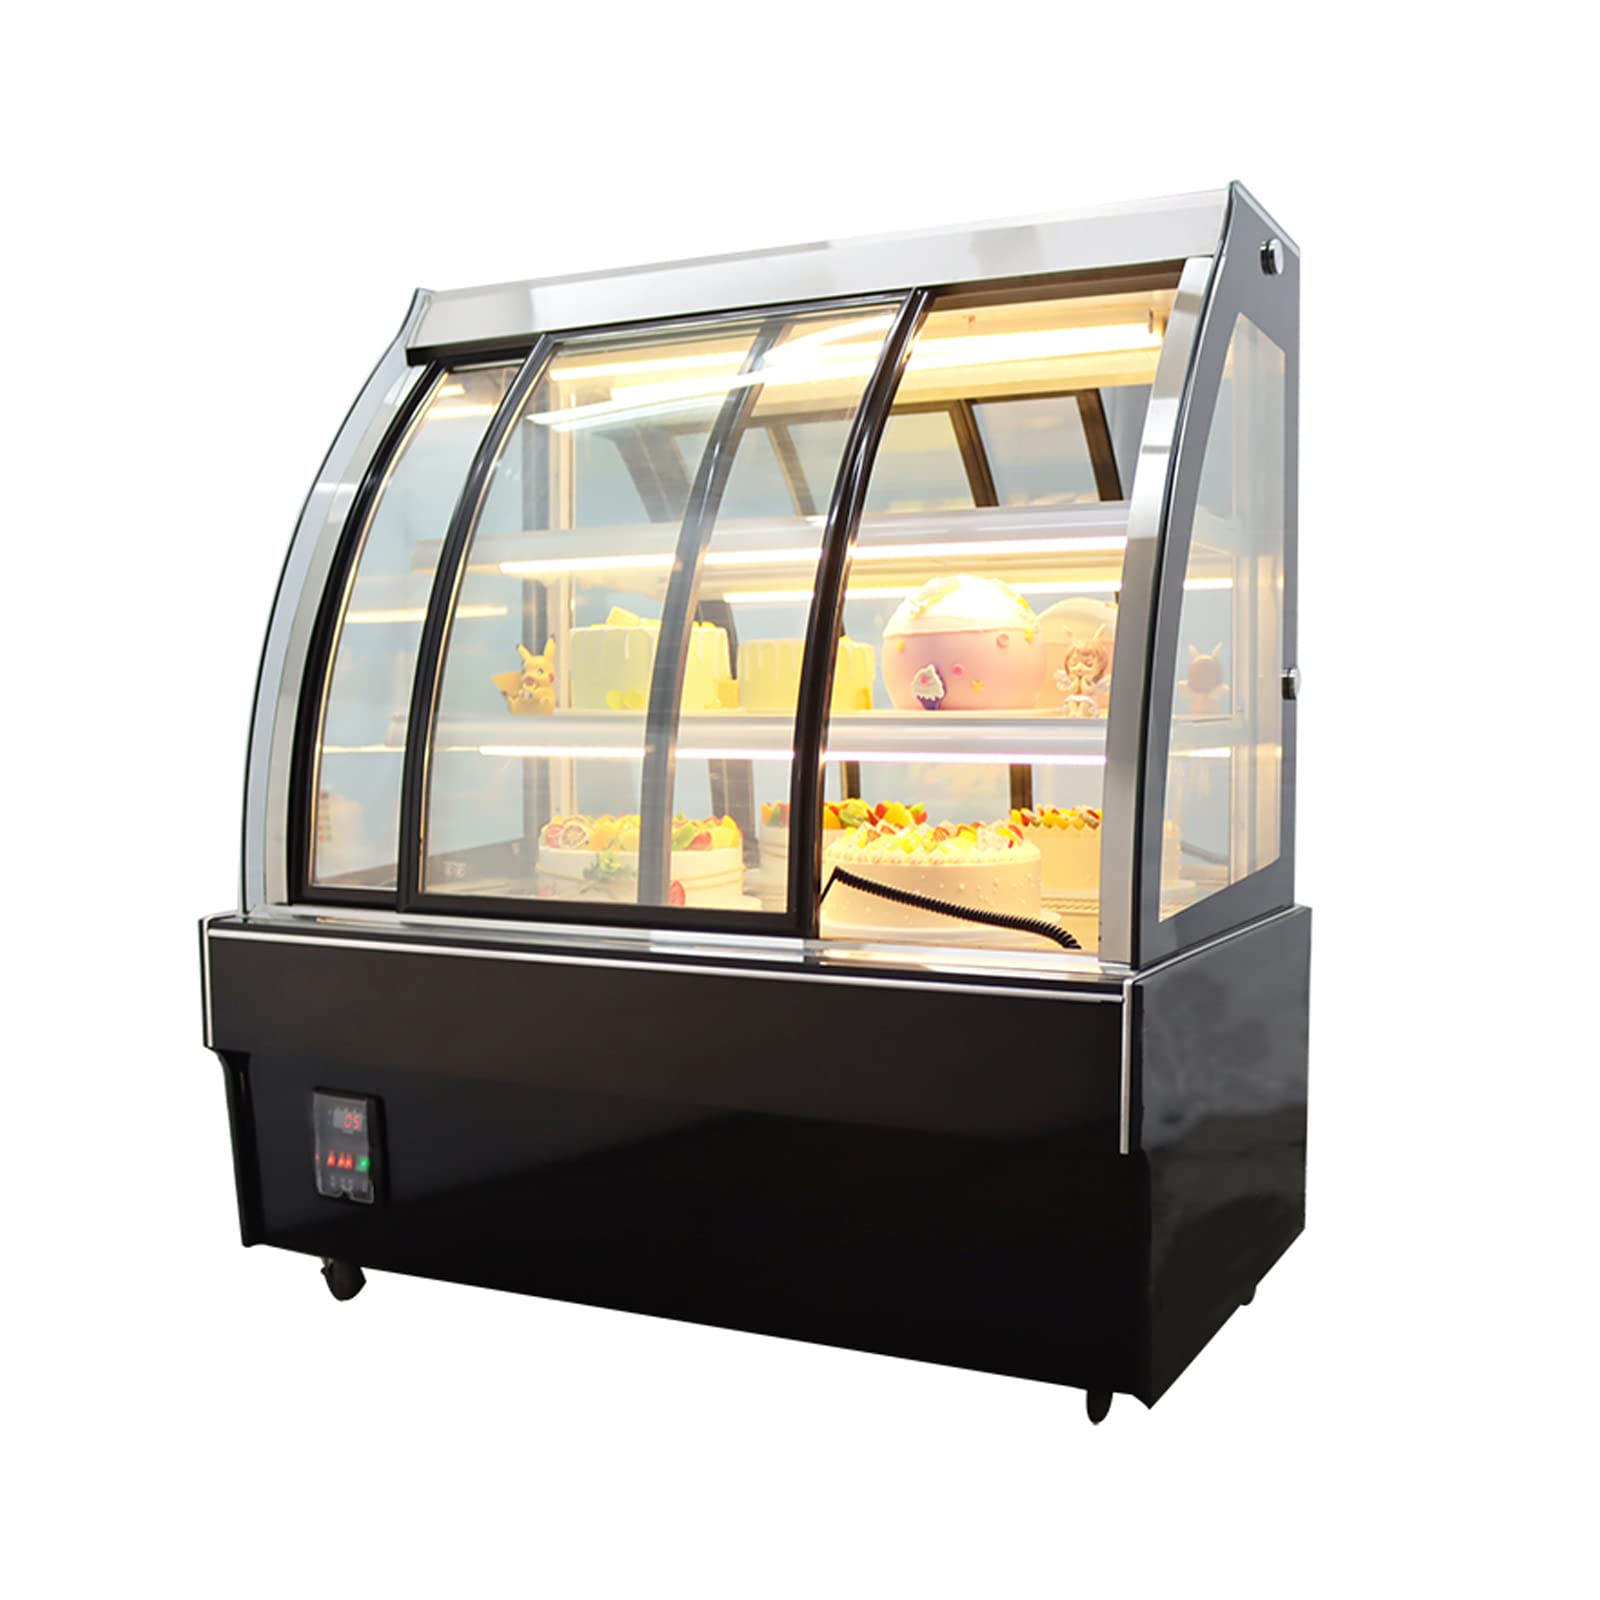 LGXEnzhuo Commercial Refrigerated Cake Display Cabinet Floor Type Curved Display Fridge Yellow LED Light Air-cooled Automatic Defrost Front Sliding Door 220V 3-layer